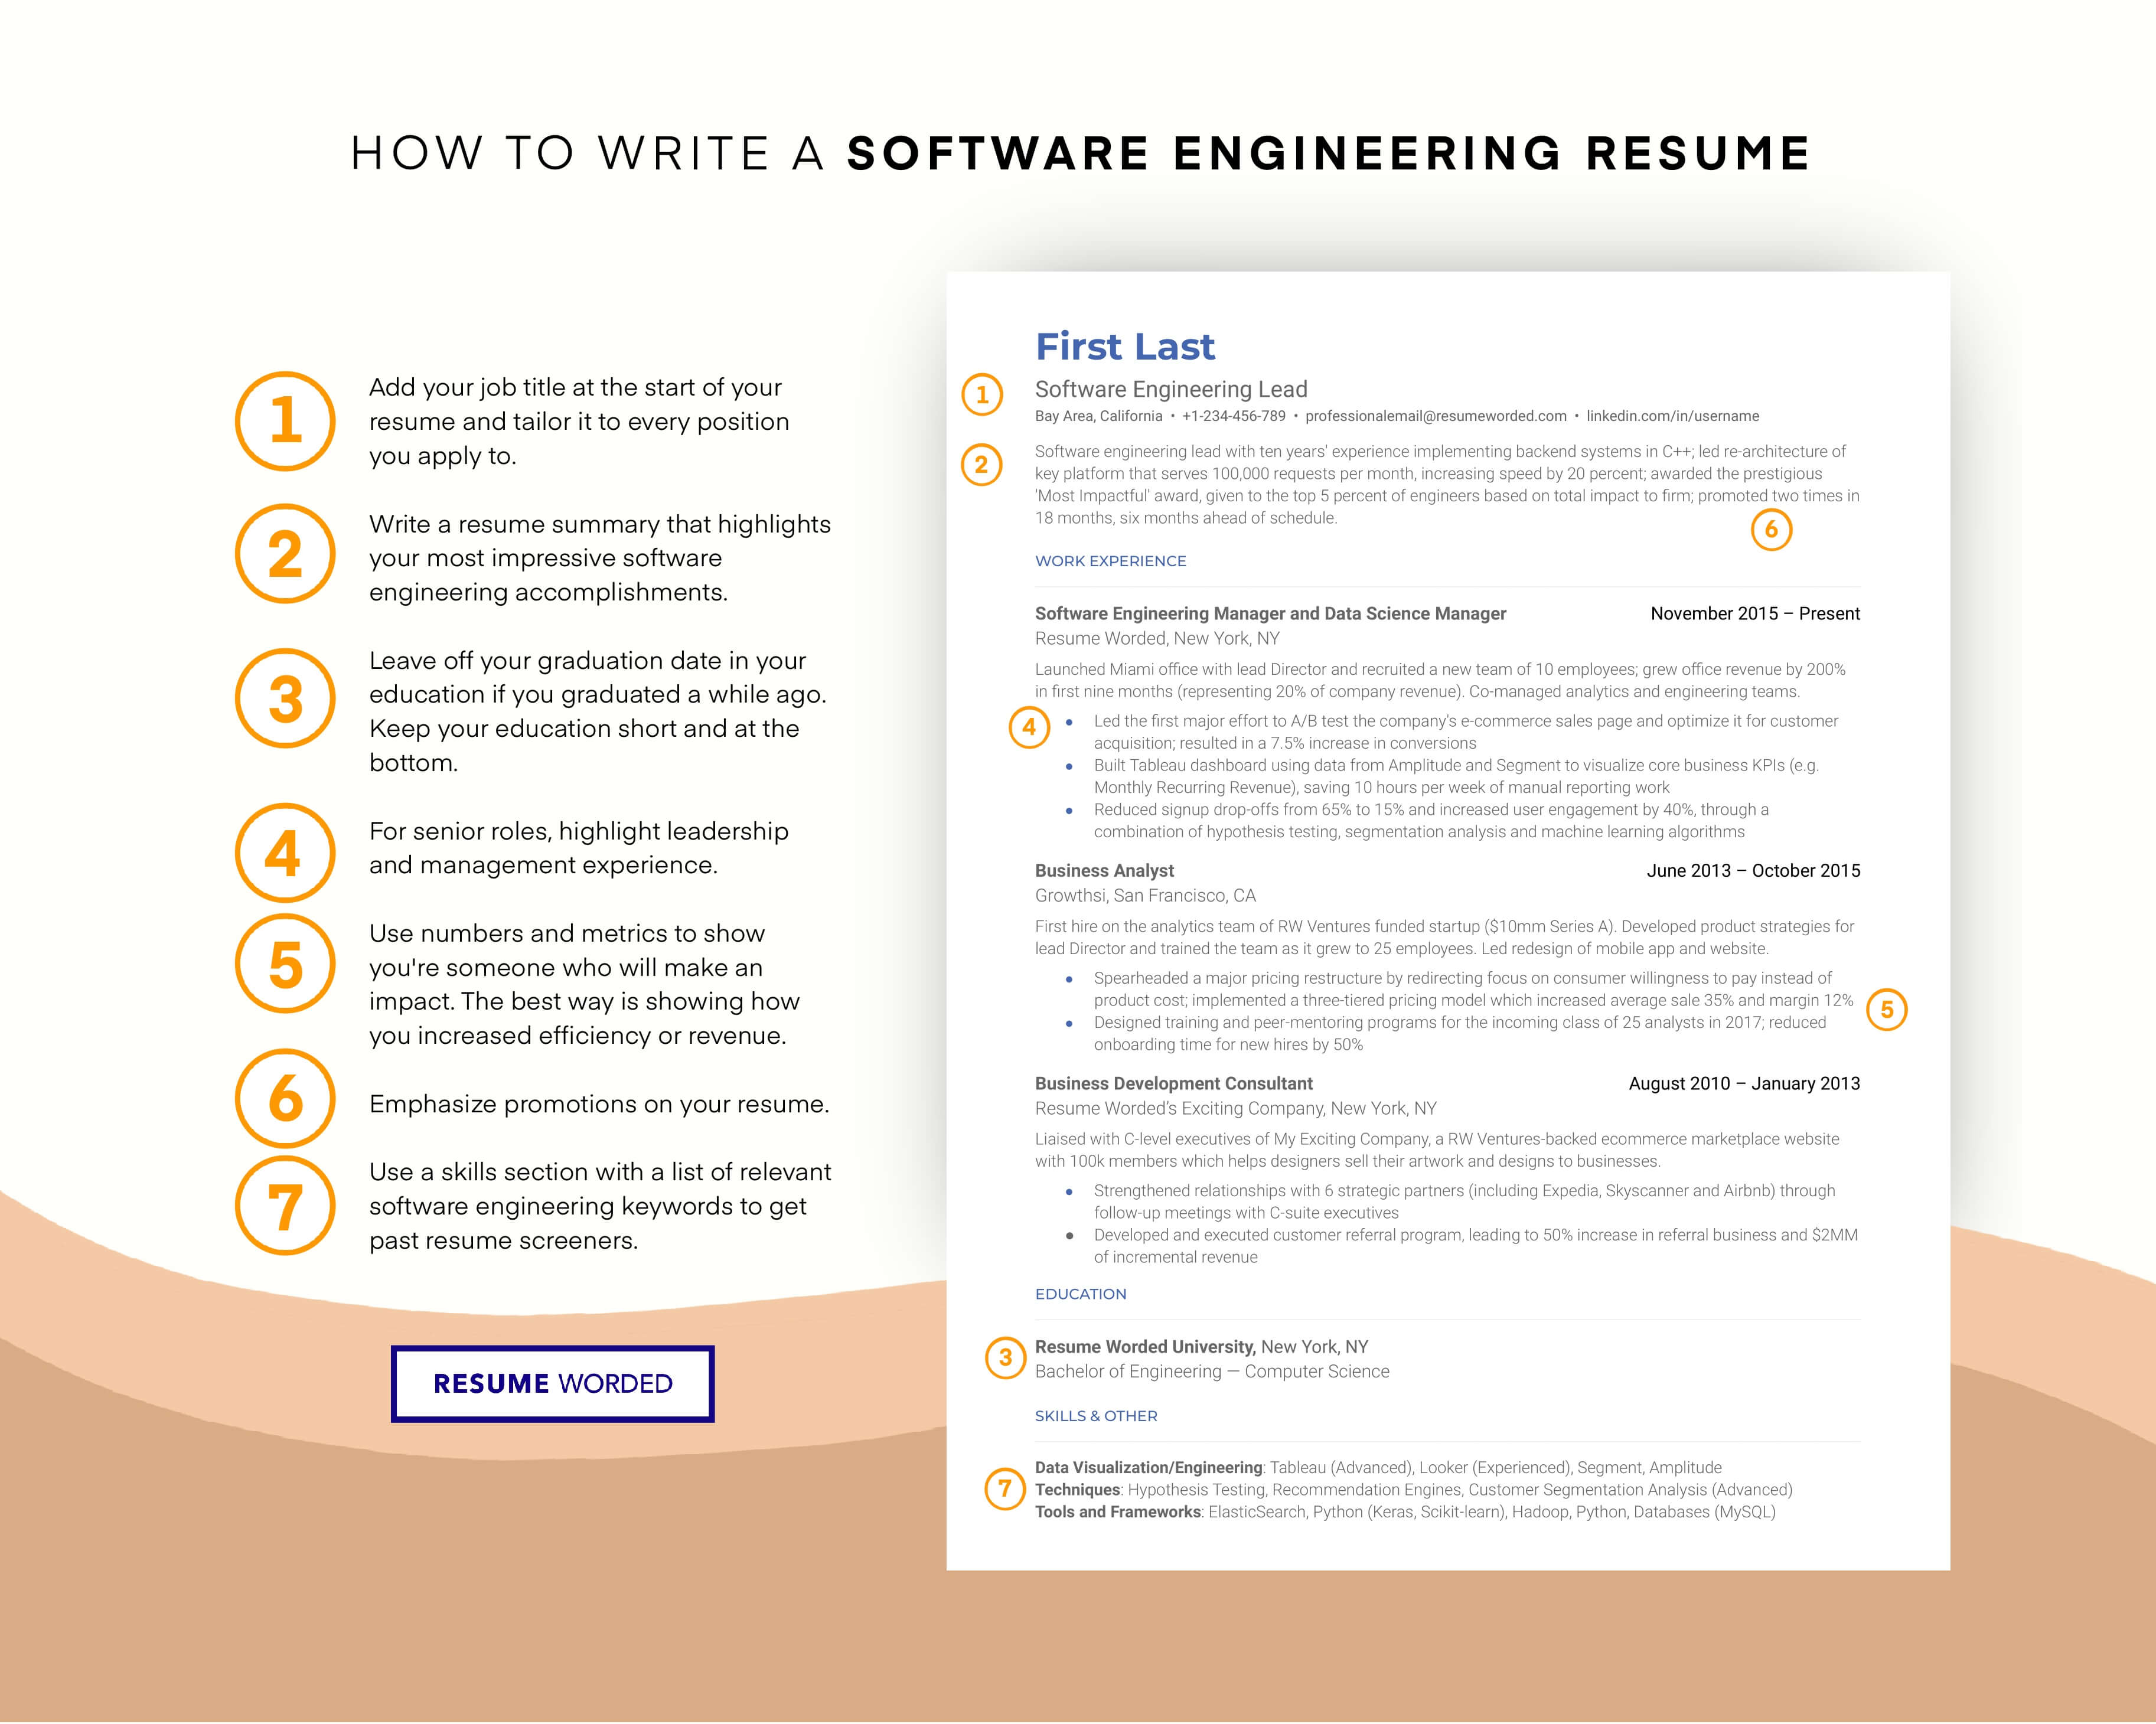 Highlight your years of experience in software engineering. - Director of Software Engineering Resume